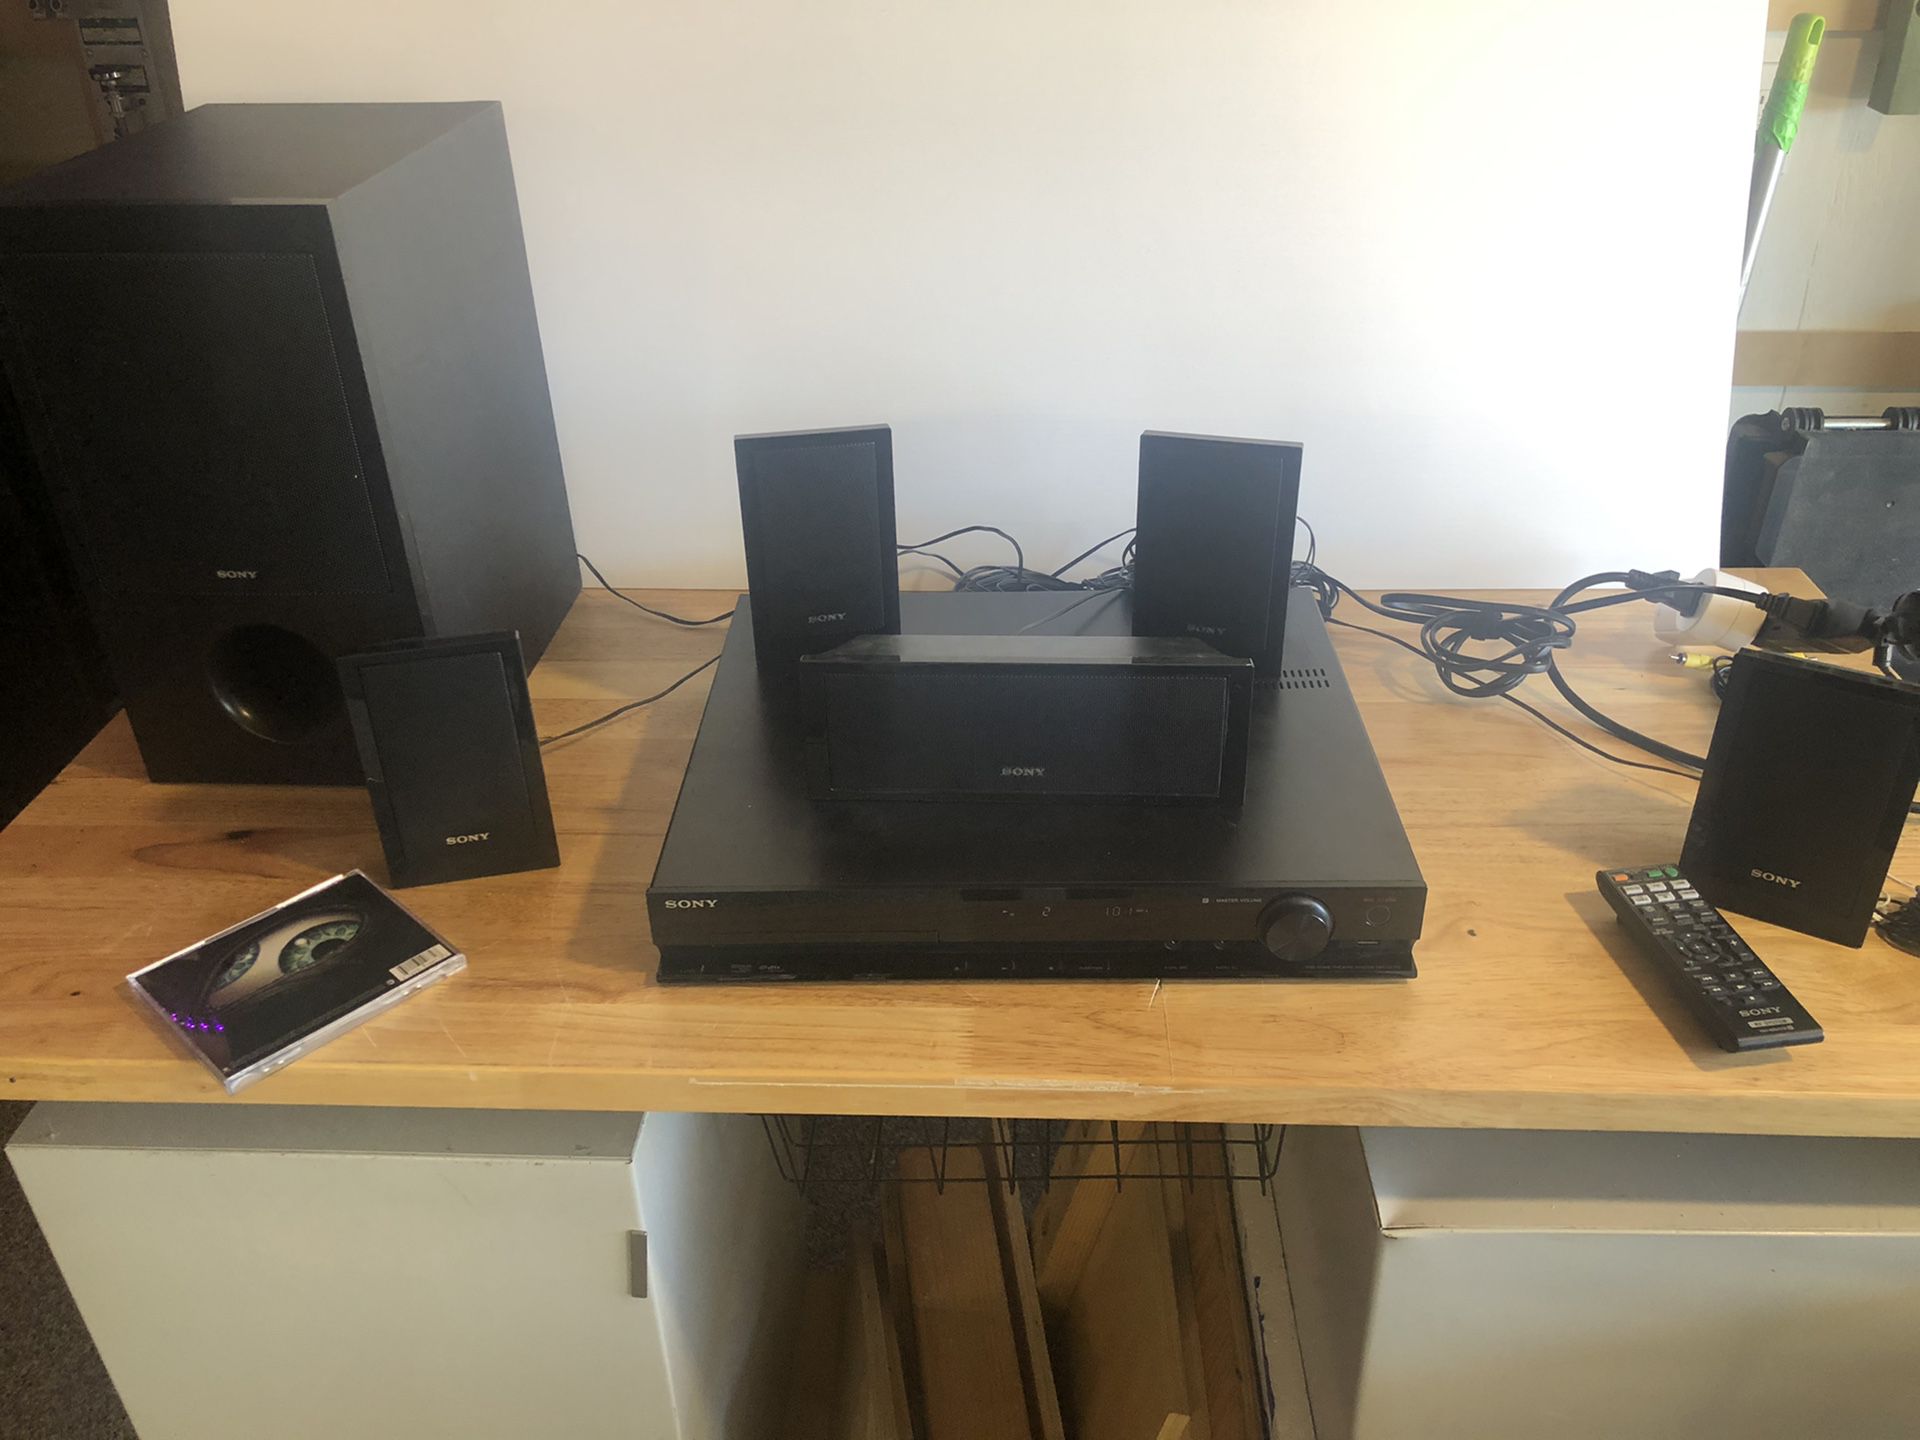 Sony 5.1 Receiver/CD/DVD player, Speakers, and subwoofer.